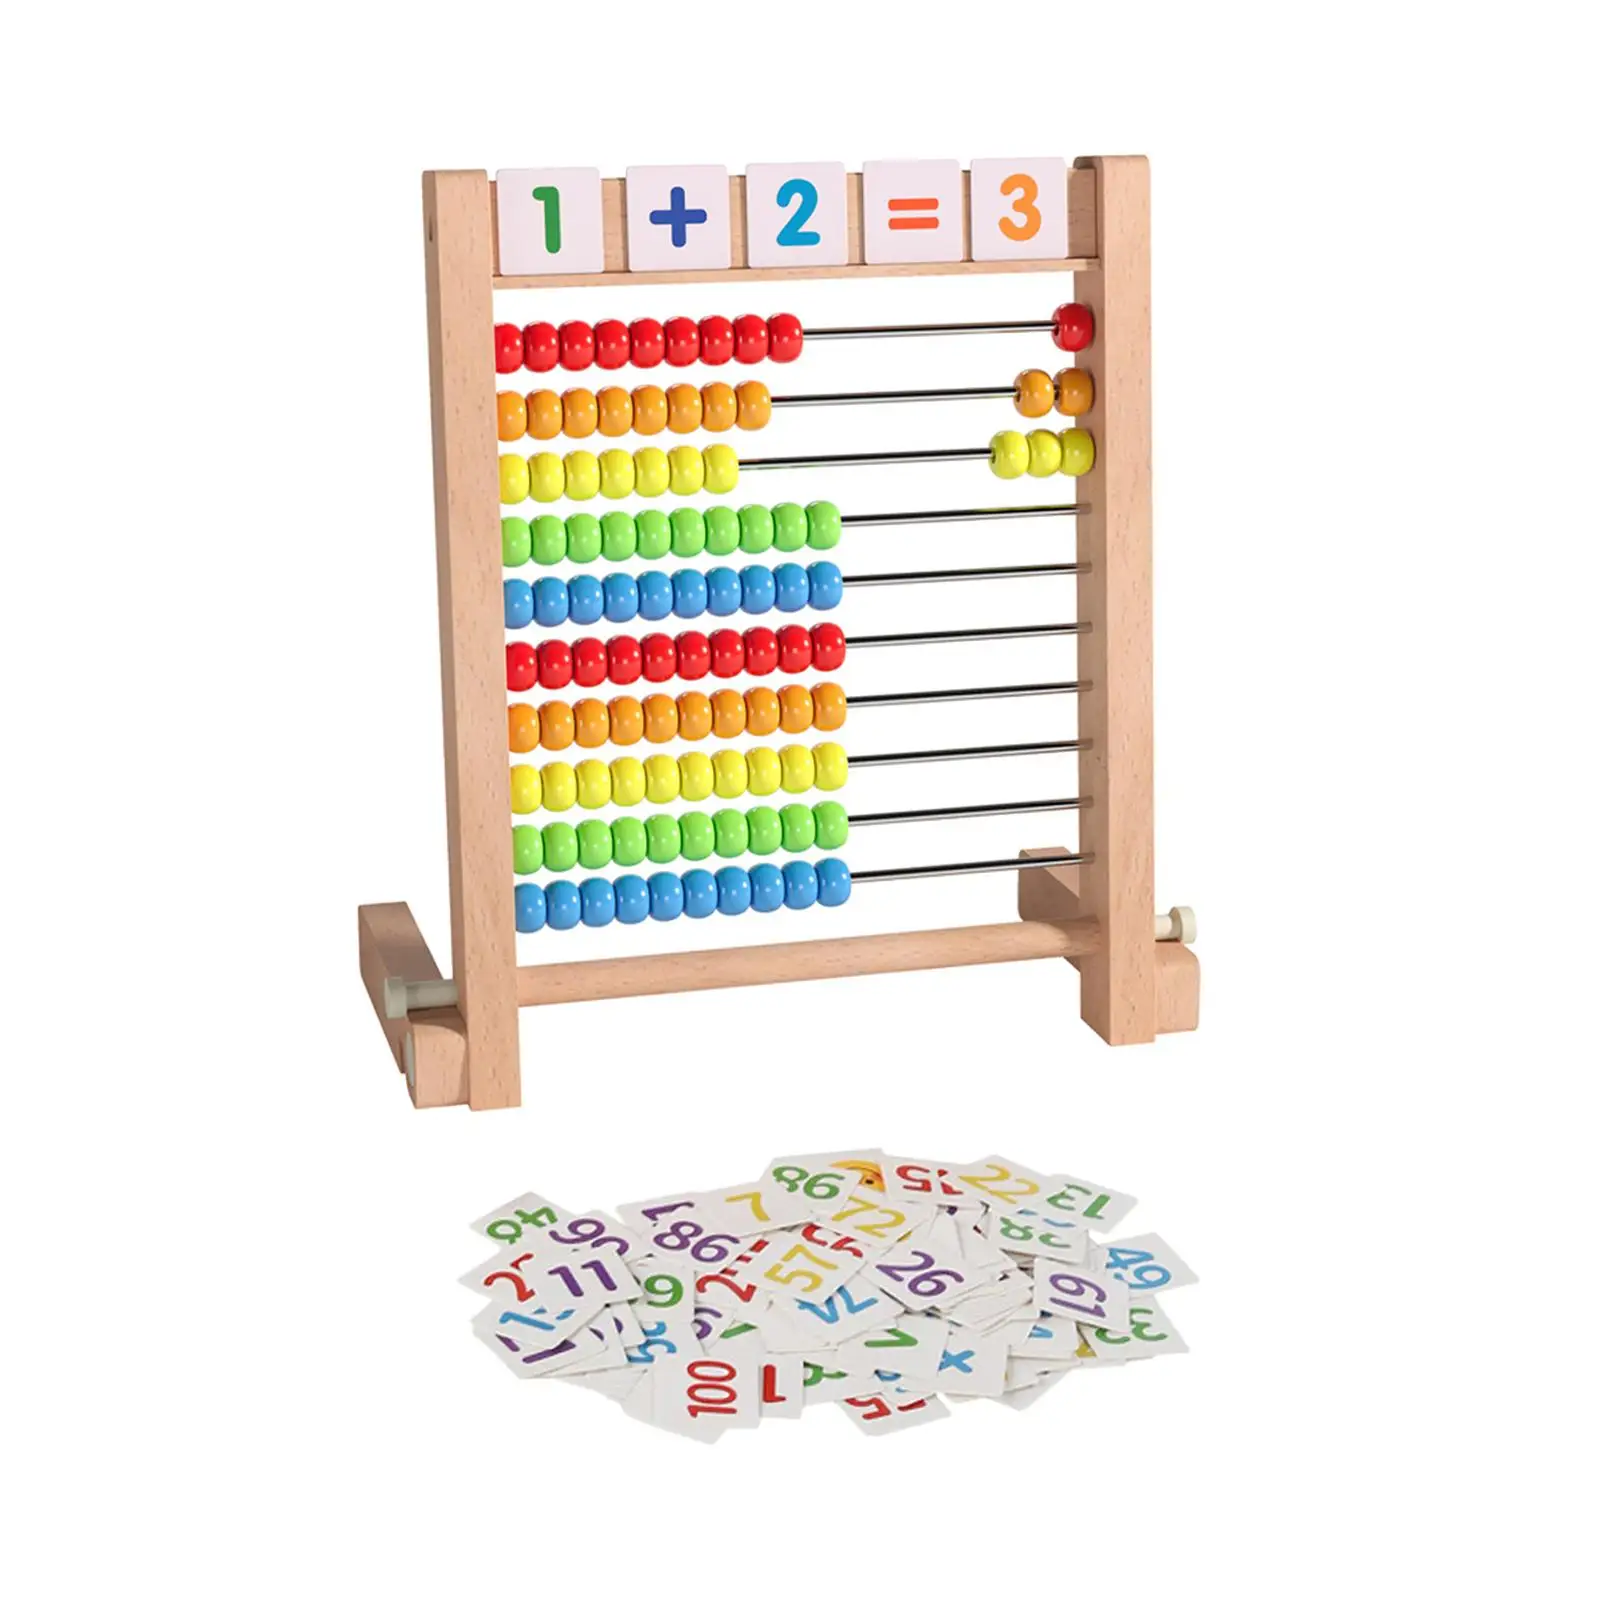 Add Subtract Abacus Ten Frame Set with Number Cards Educational Counting Toy for Elementary Toddlers Kids Kindergarten Learning